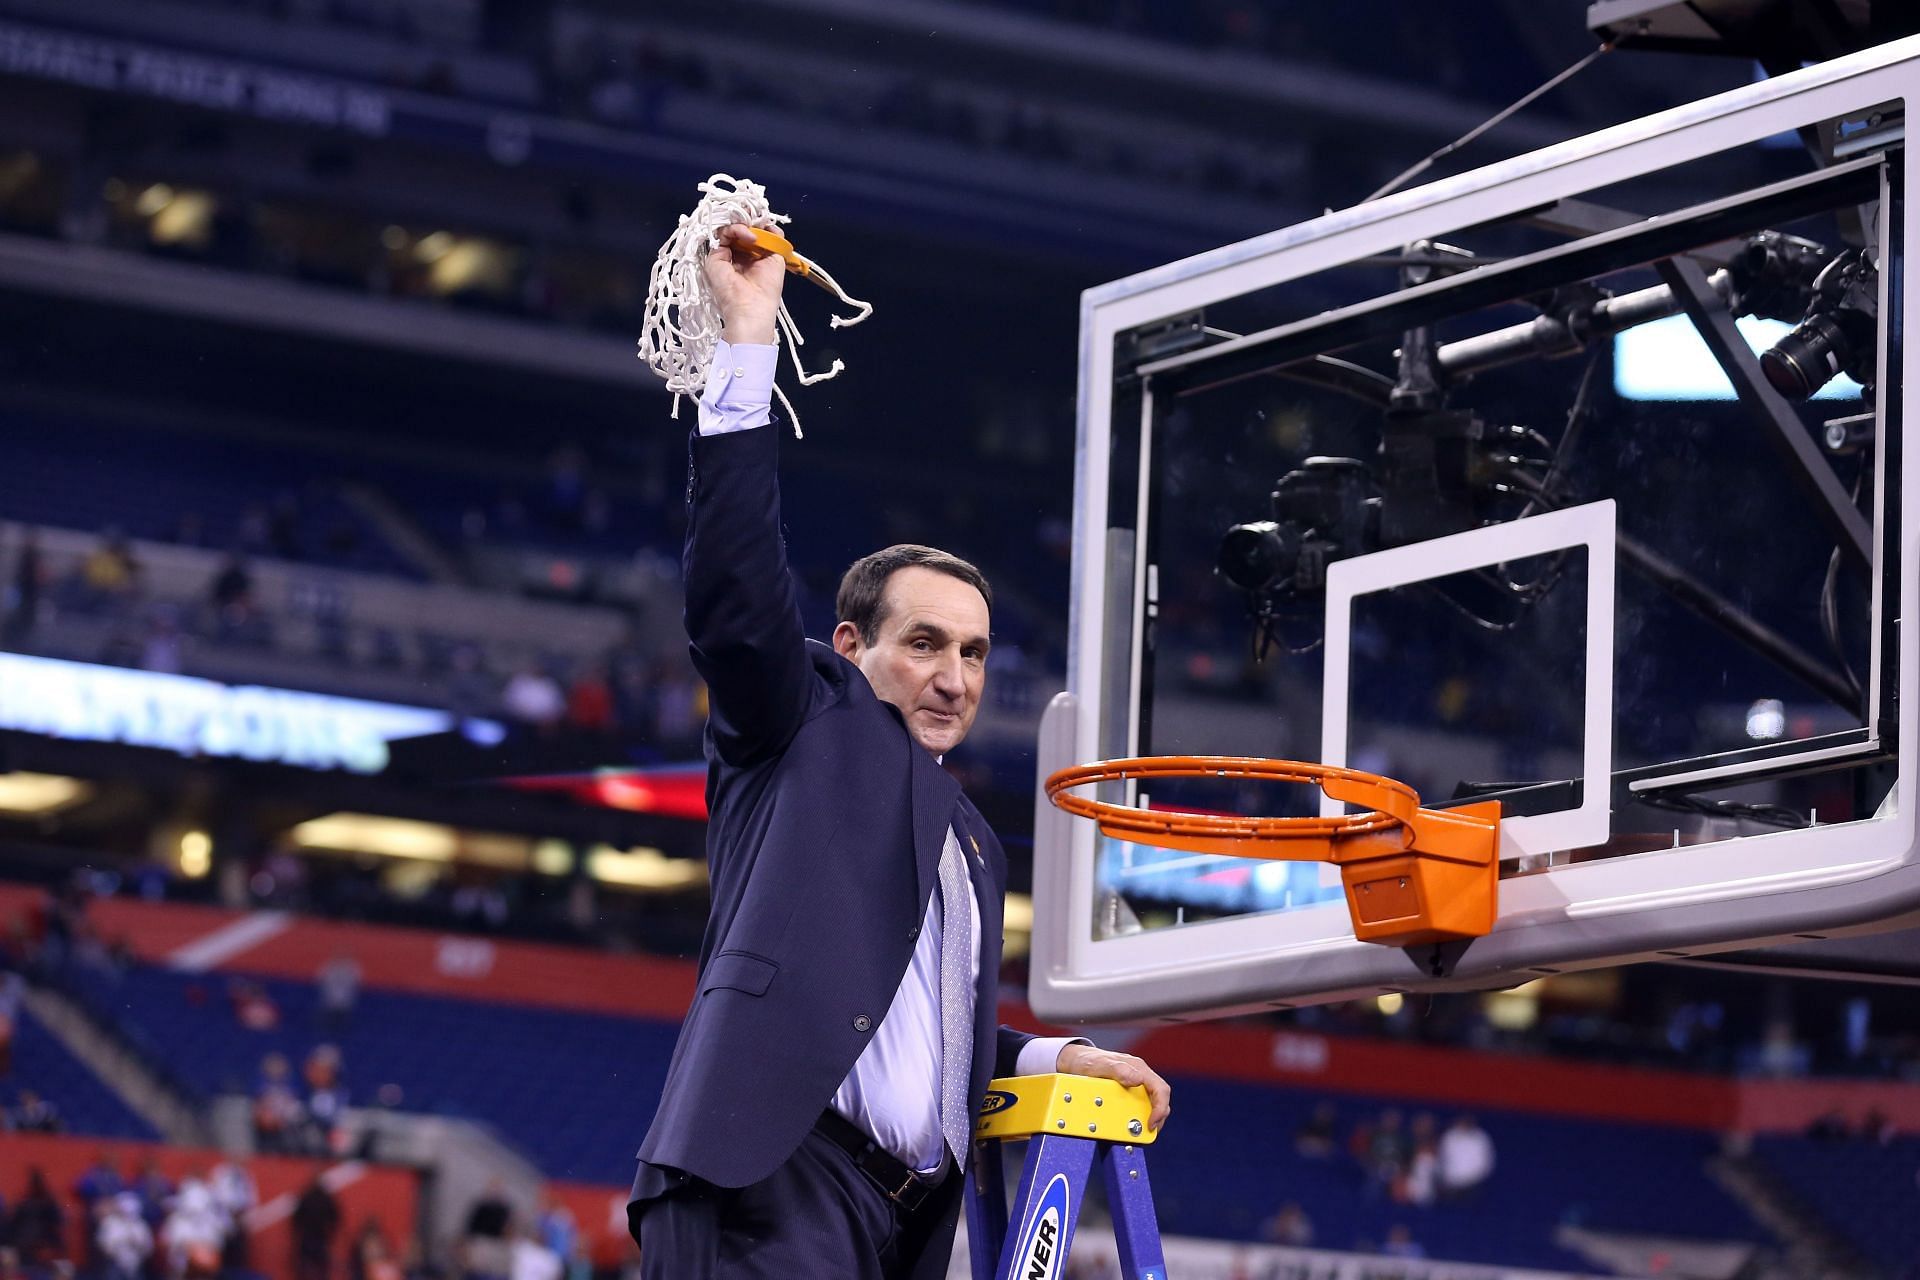 Coach K is trying to win one last ACC and NCAA championship before retiring.